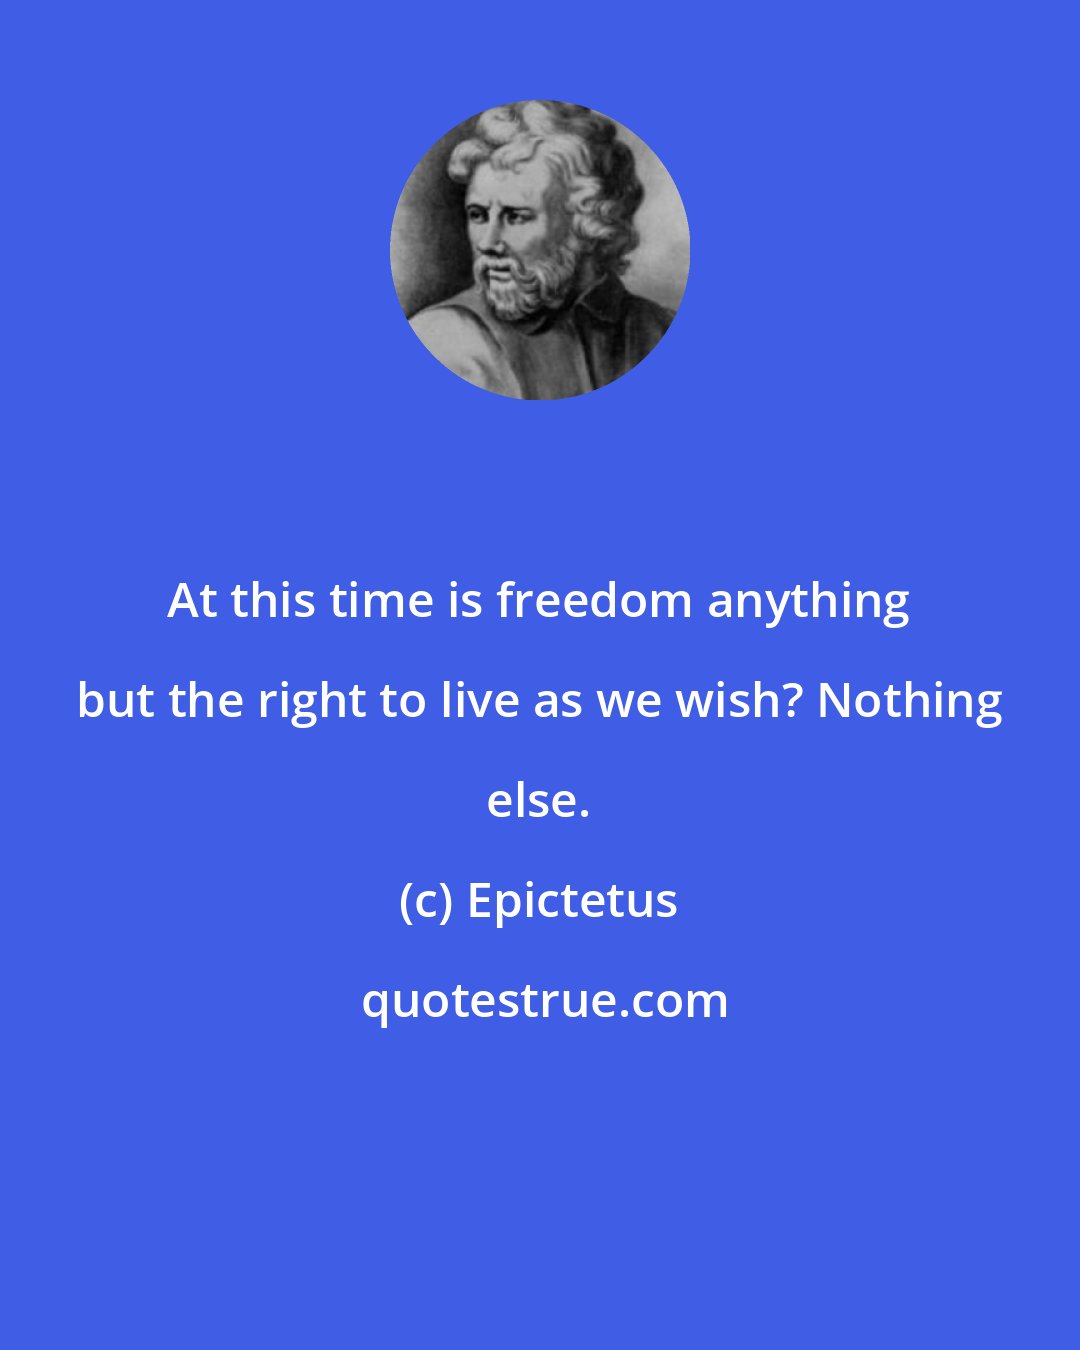 Epictetus: At this time is freedom anything but the right to live as we wish? Nothing else.